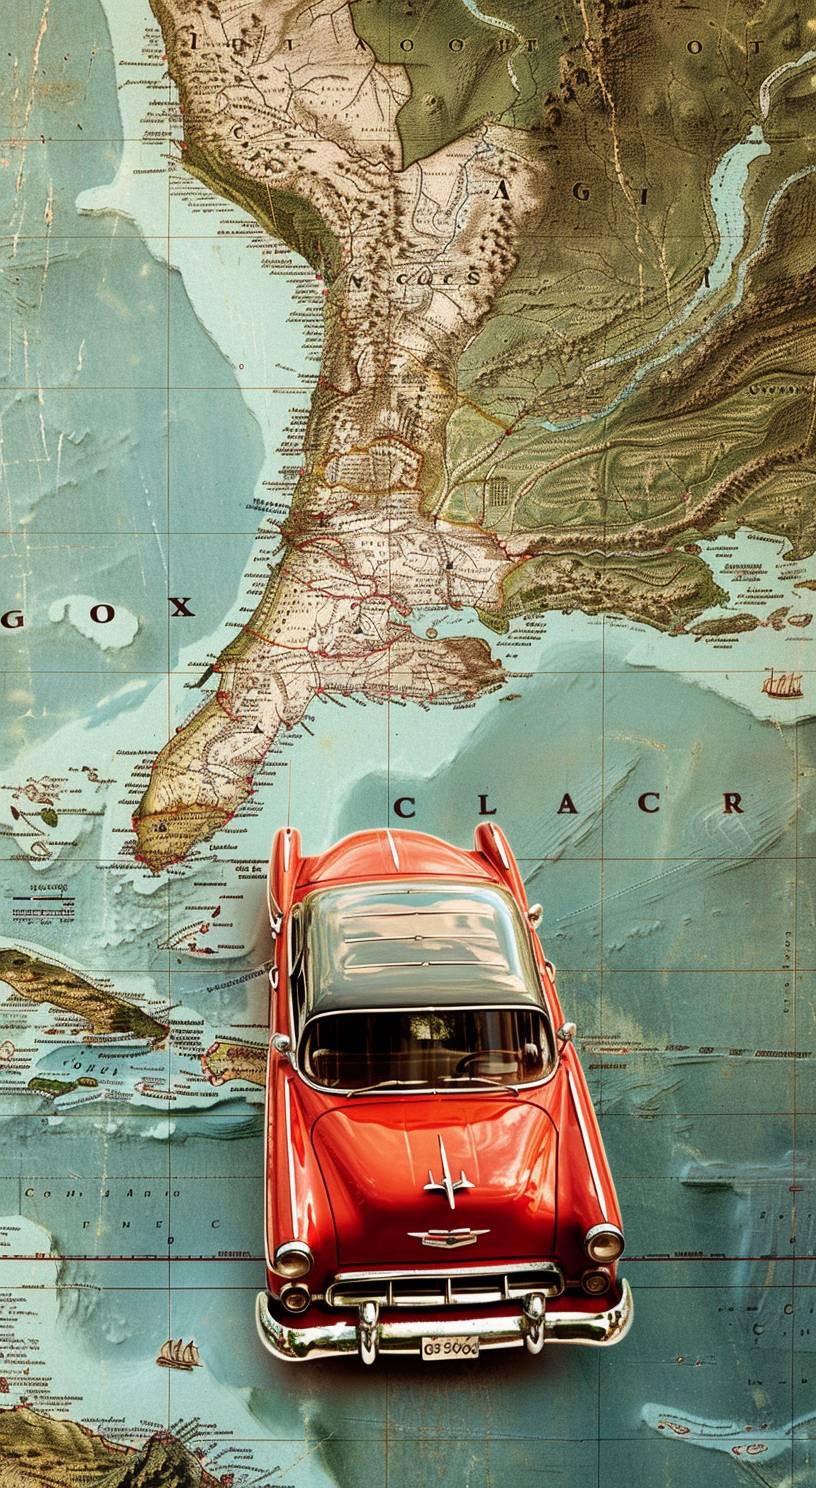 In the top 20% of the image, create a gradual map using elements of Cuba travel, the white space in the middle is used for copywriting, Cuba is used in about 20% of the top of the image. The overall pattern style is realistic with warm tones. The ratio of the base map is required to be the same as that of A4 paper. The white space in the middle is used for copywriting. High detail